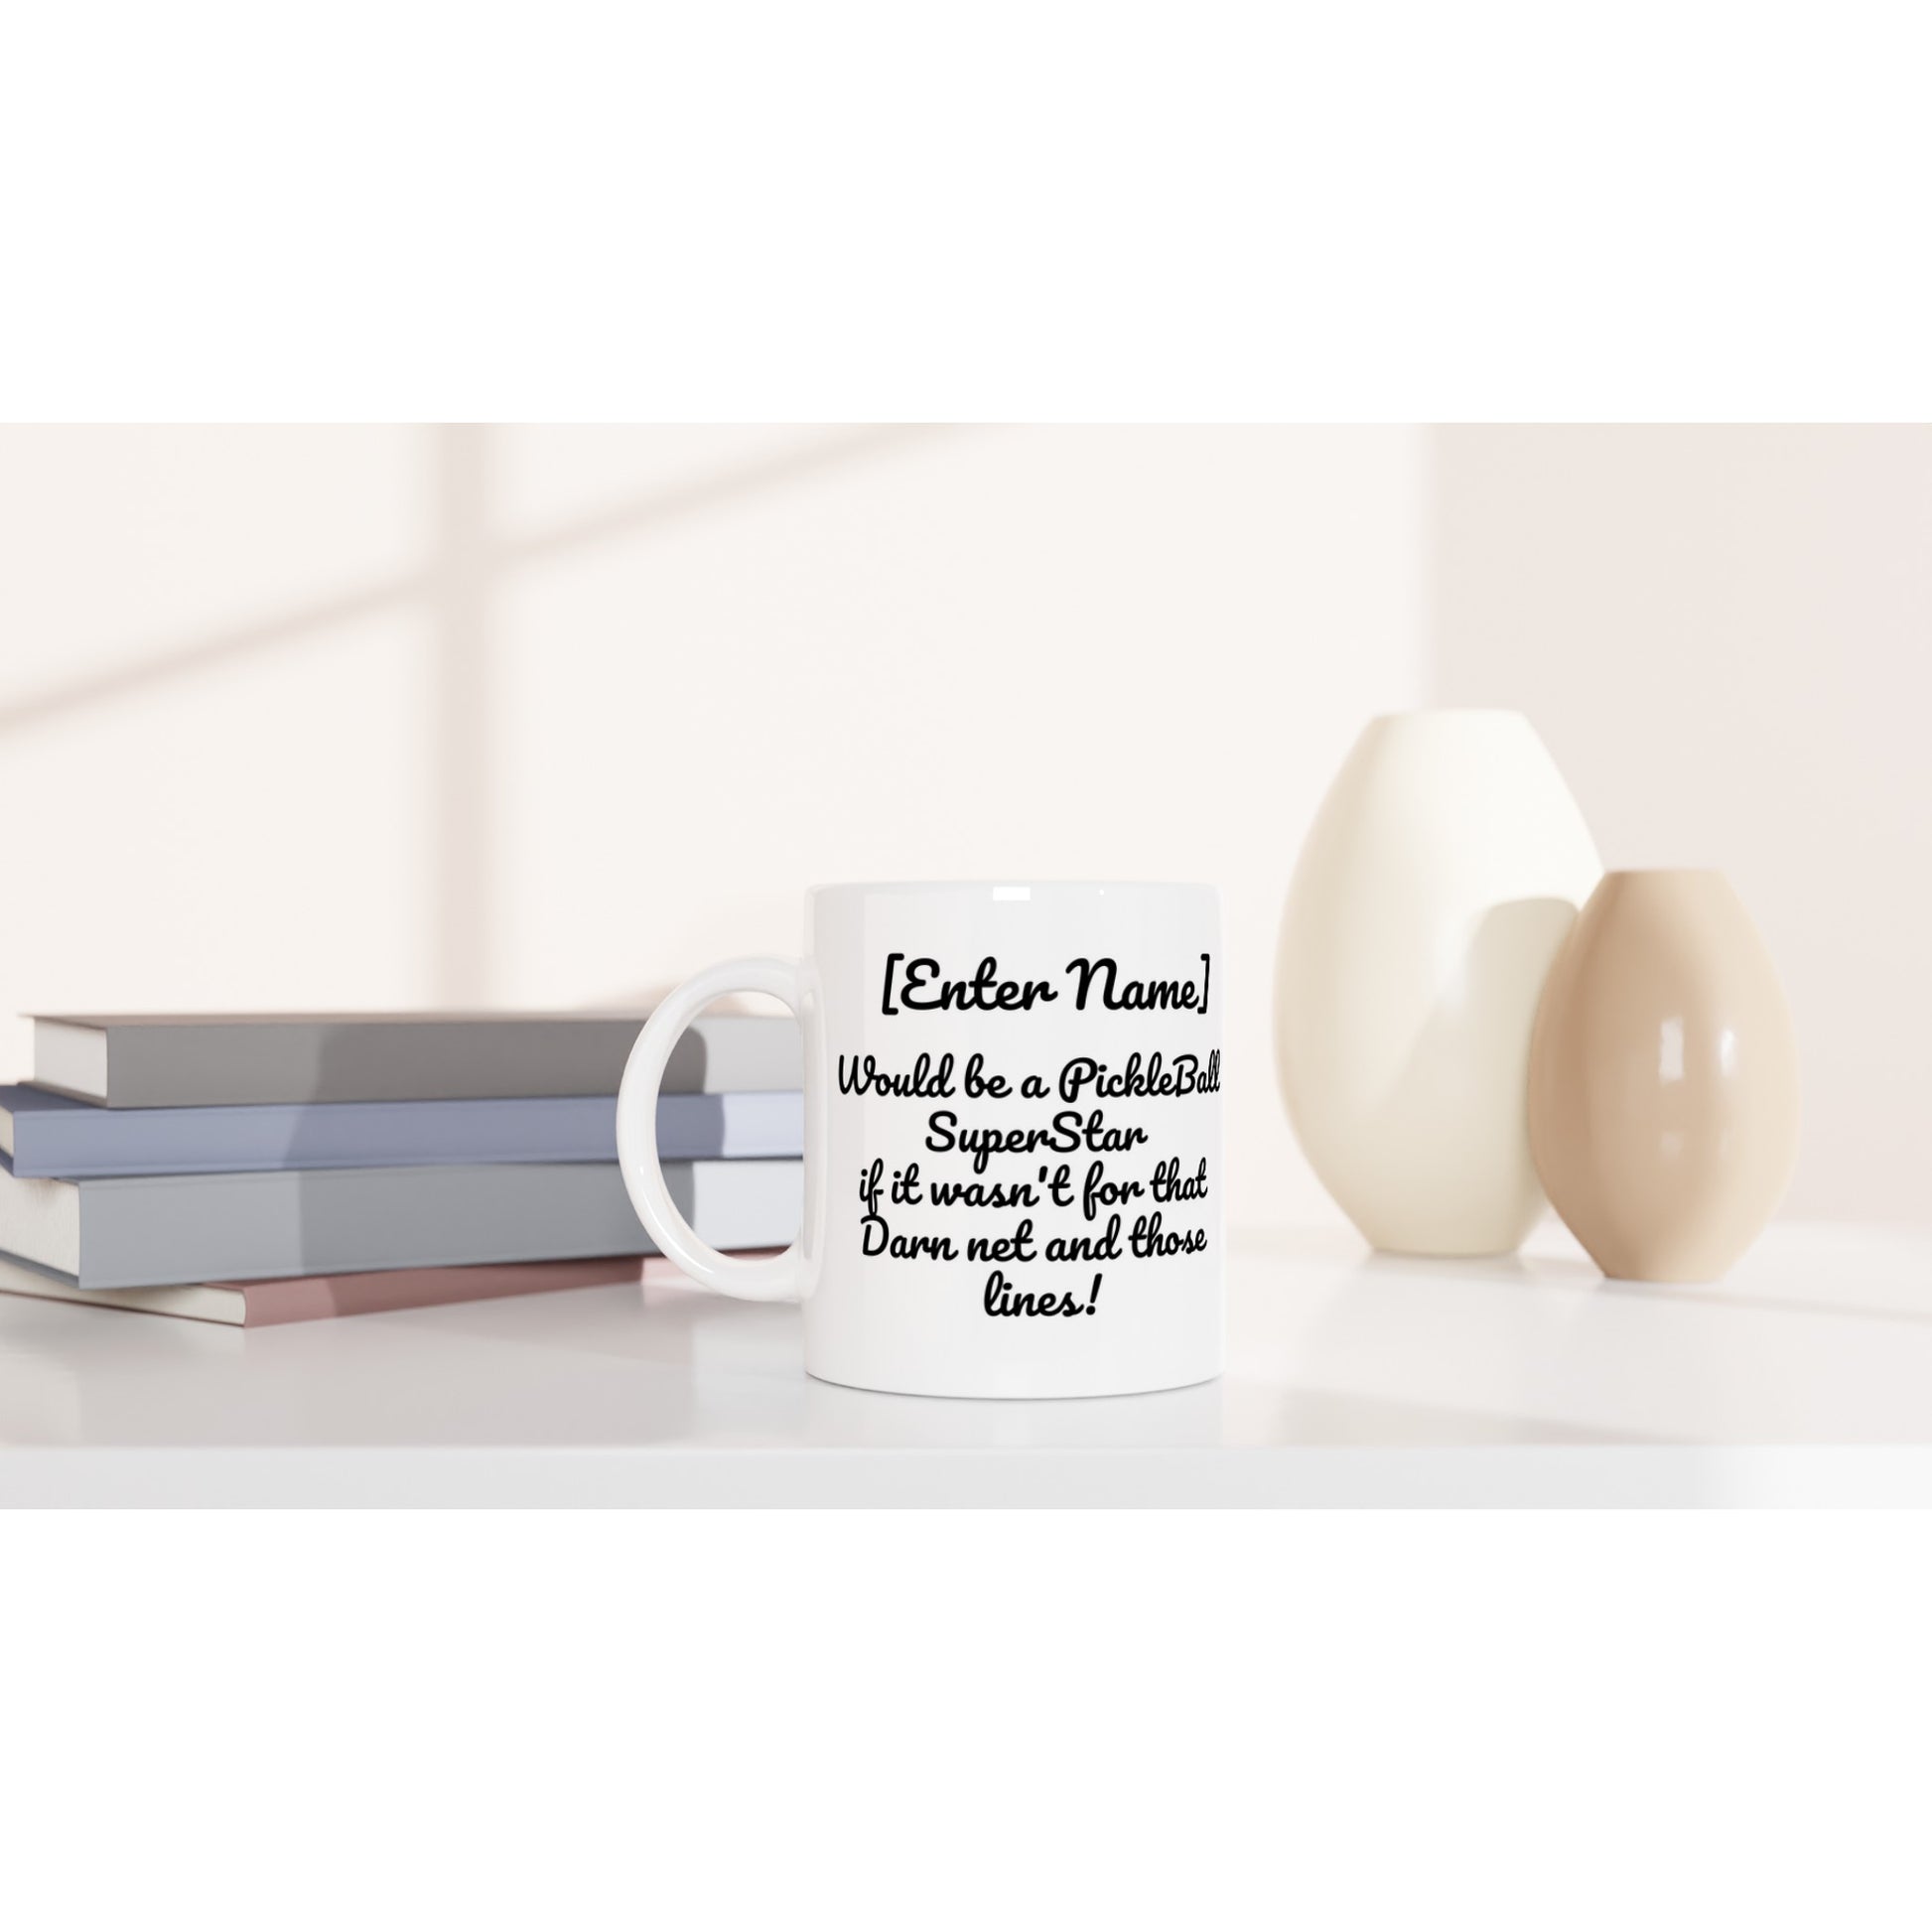 Personalized white ceramic 11oz mug with personalized motto Your Name Would be a PickleBall Superstar if it wasn’t for that Darn net and those lines on front and Let's Play Pickleball logo on back dishwasher and microwave safe from WhatYa Say Apparel sitting on coffee table with books and two vases. 